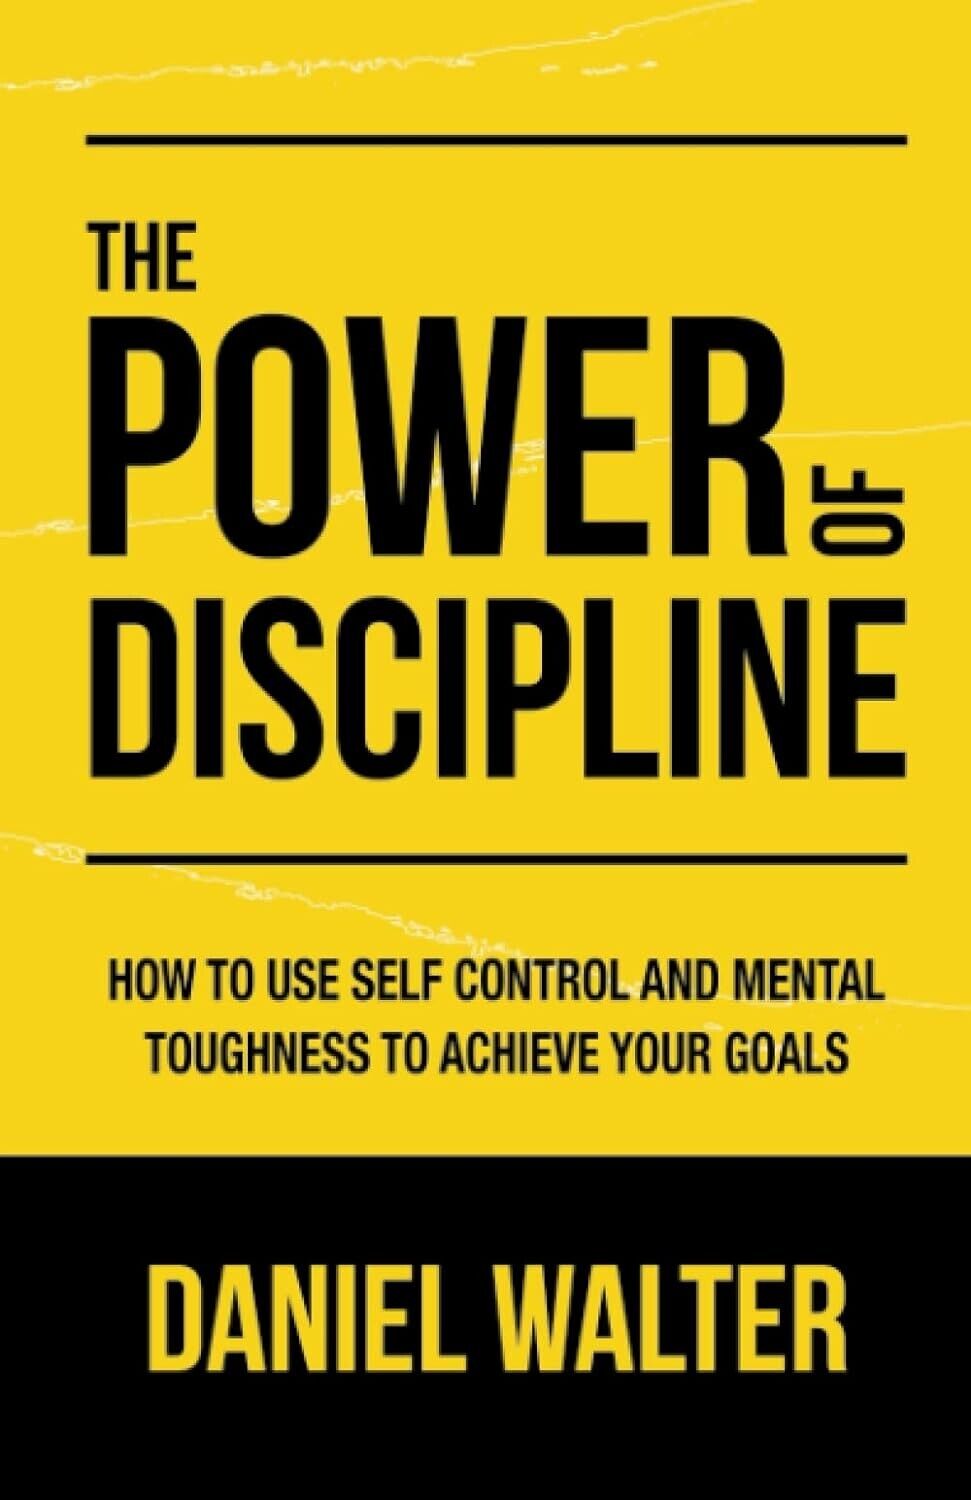 The Power of Discipline by Daniel Walter - Brand New Paperback Free Shipping